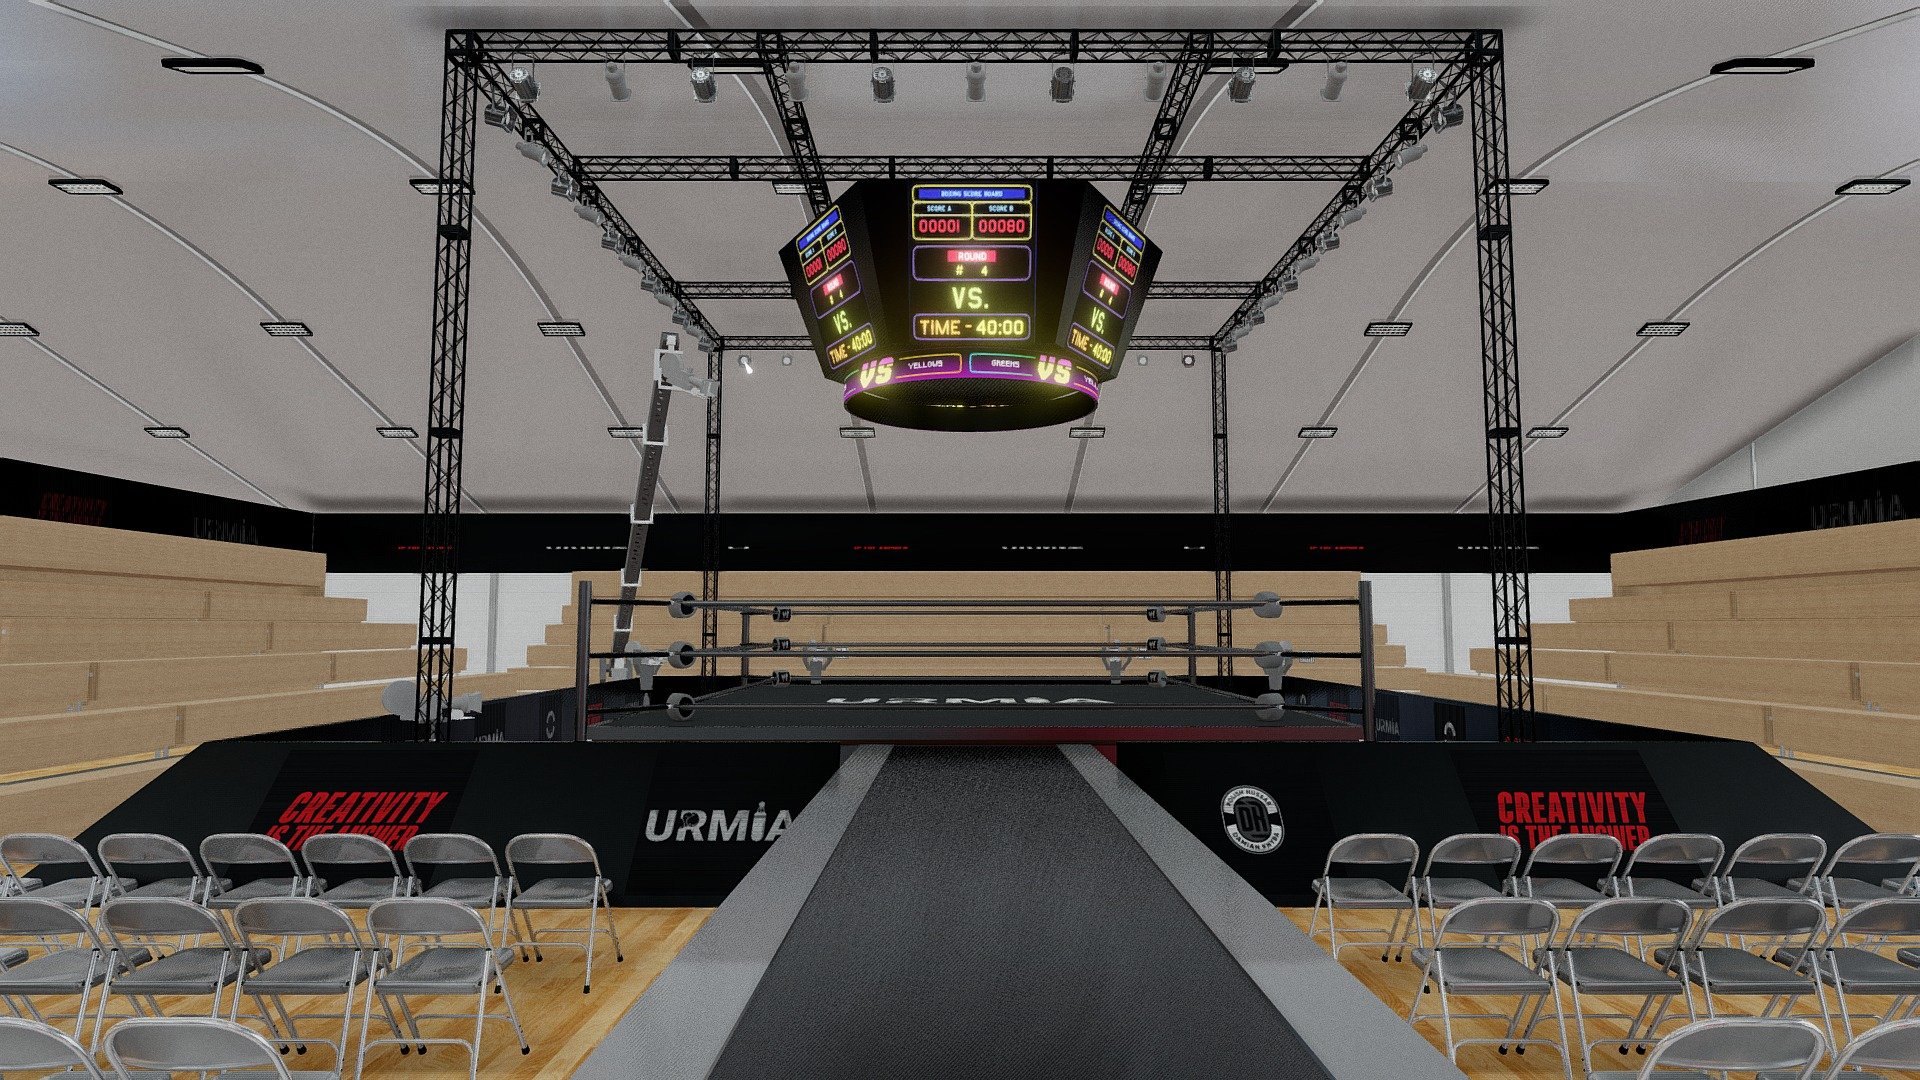 Jack: I went to a boxing match at the sports stadium 3d model